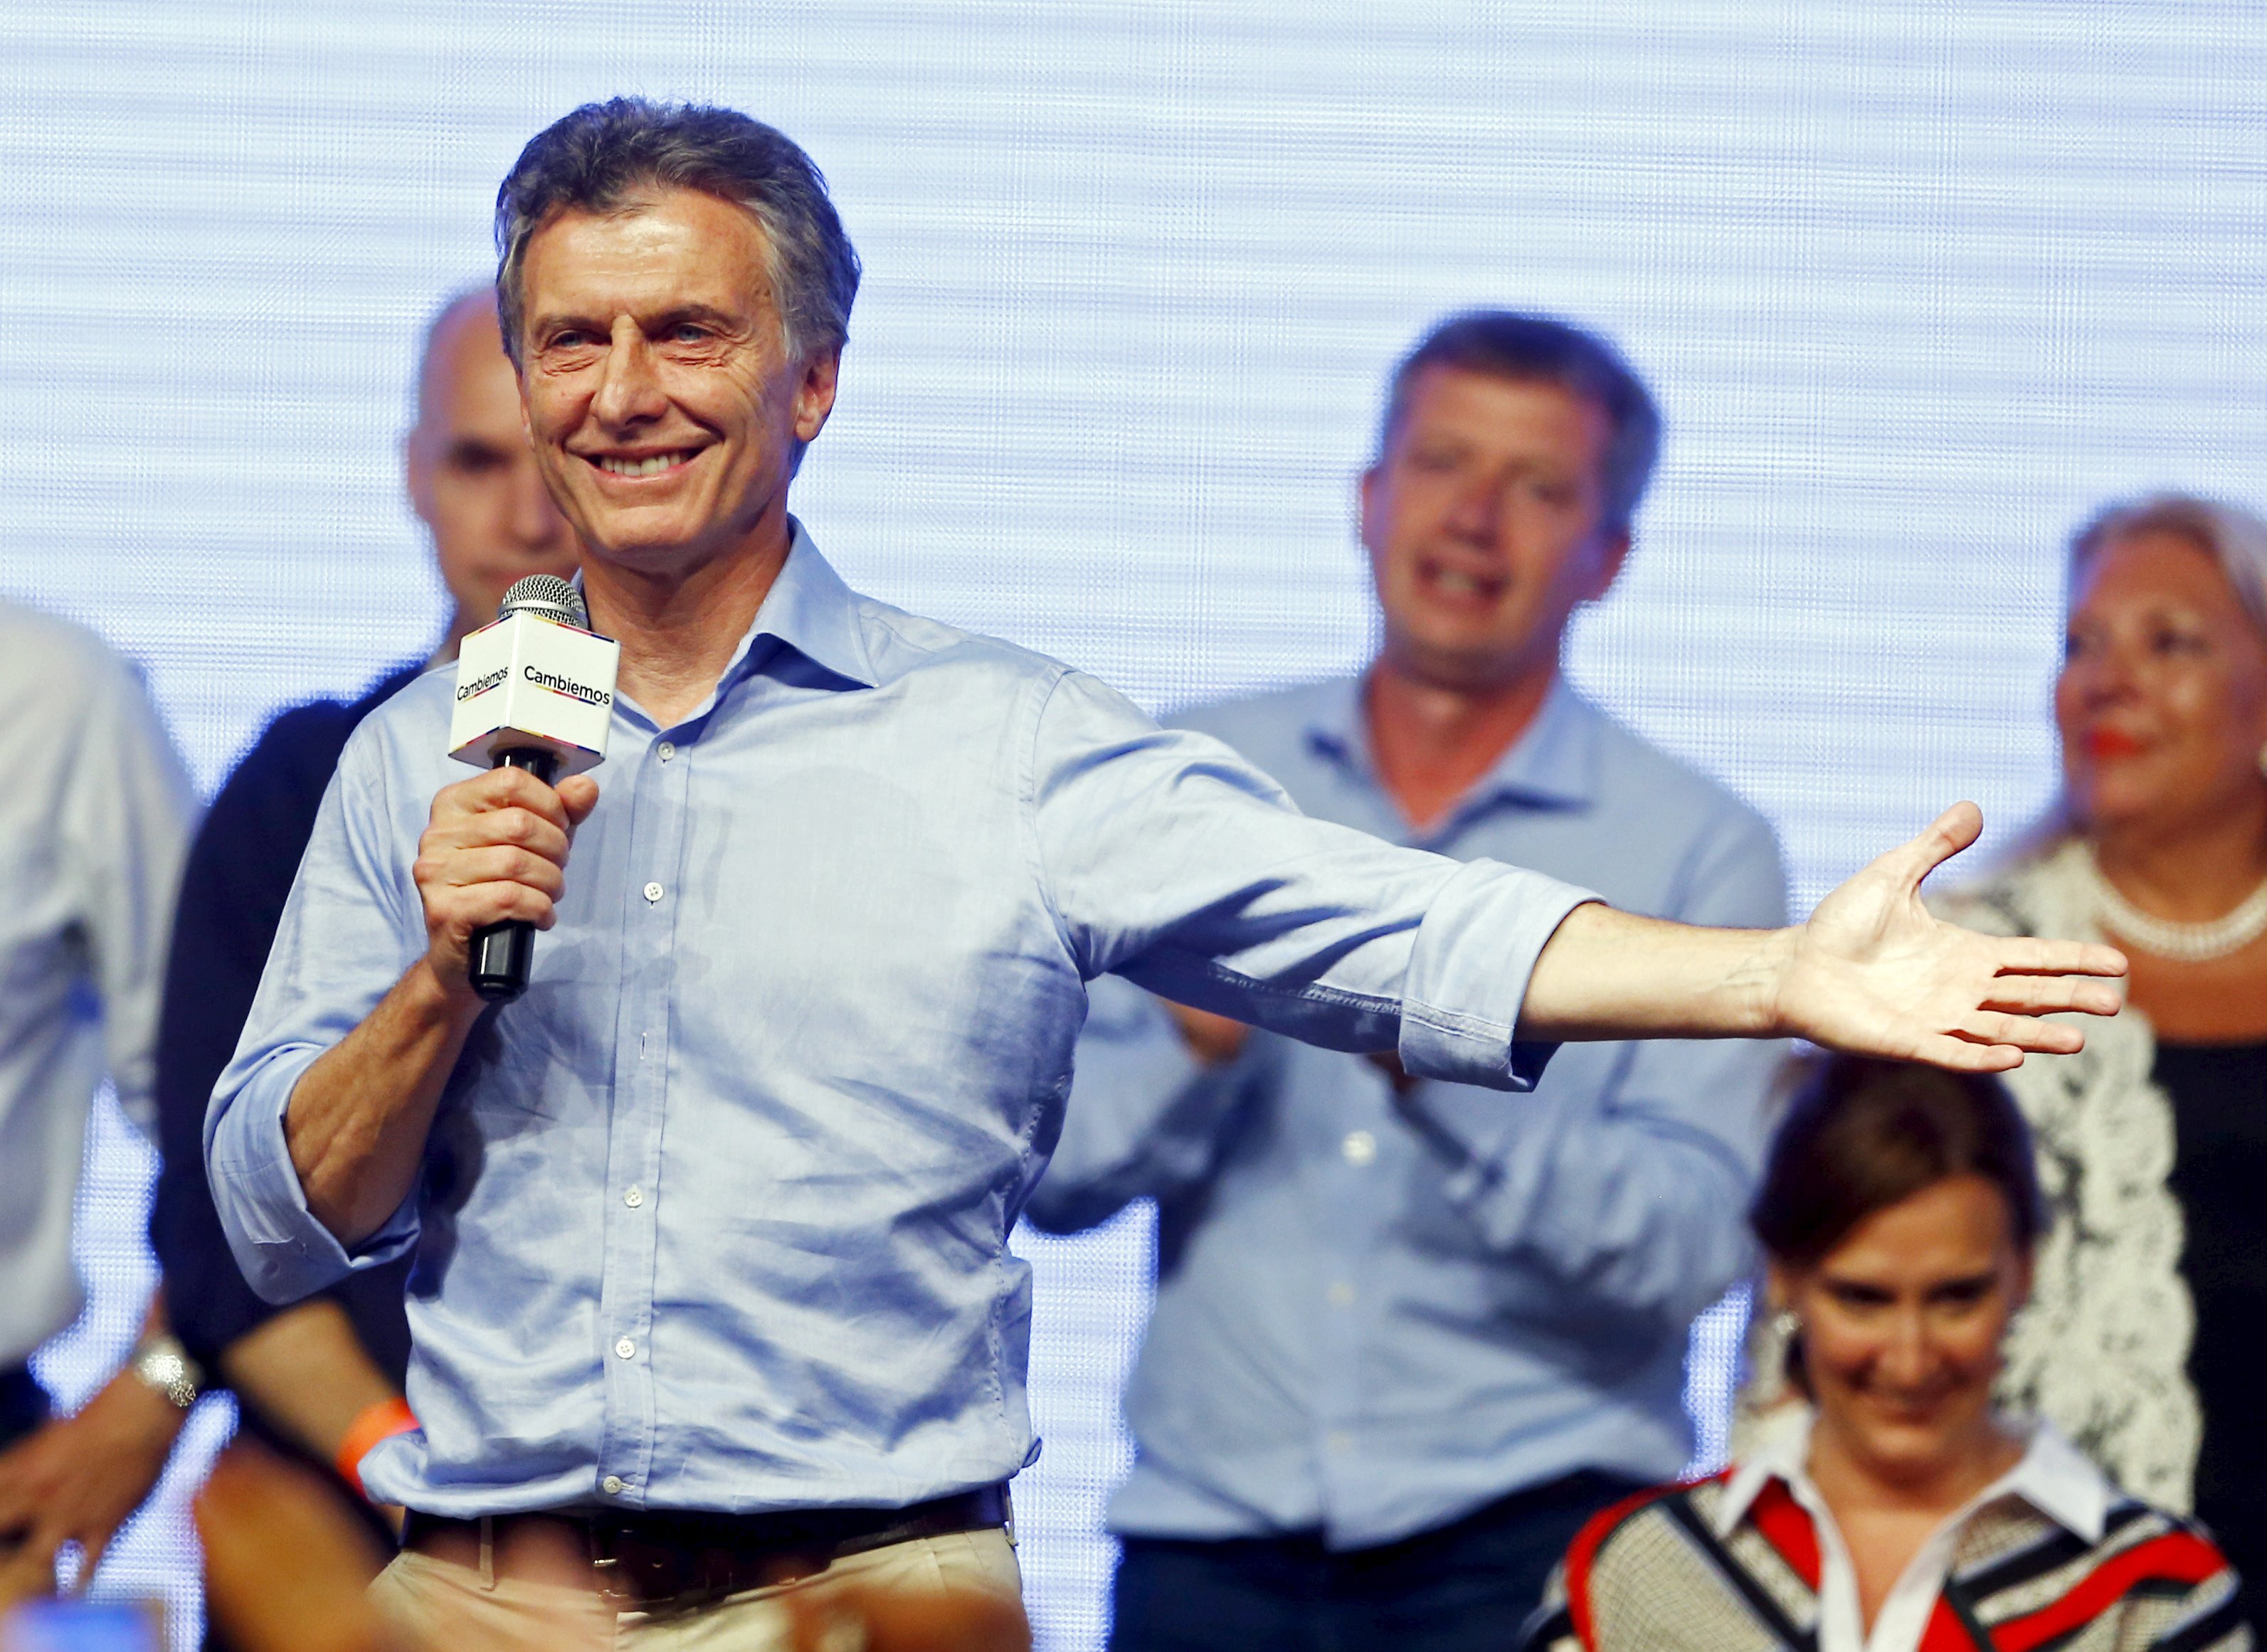 Mauricio Macri, presidential candidate of the Cambiemos coalition, speaks to his supporters after the presidential election in Buenos Aires, Argentina on Nov. 22, 2015. (Enrique Marcarian—REUTERS)